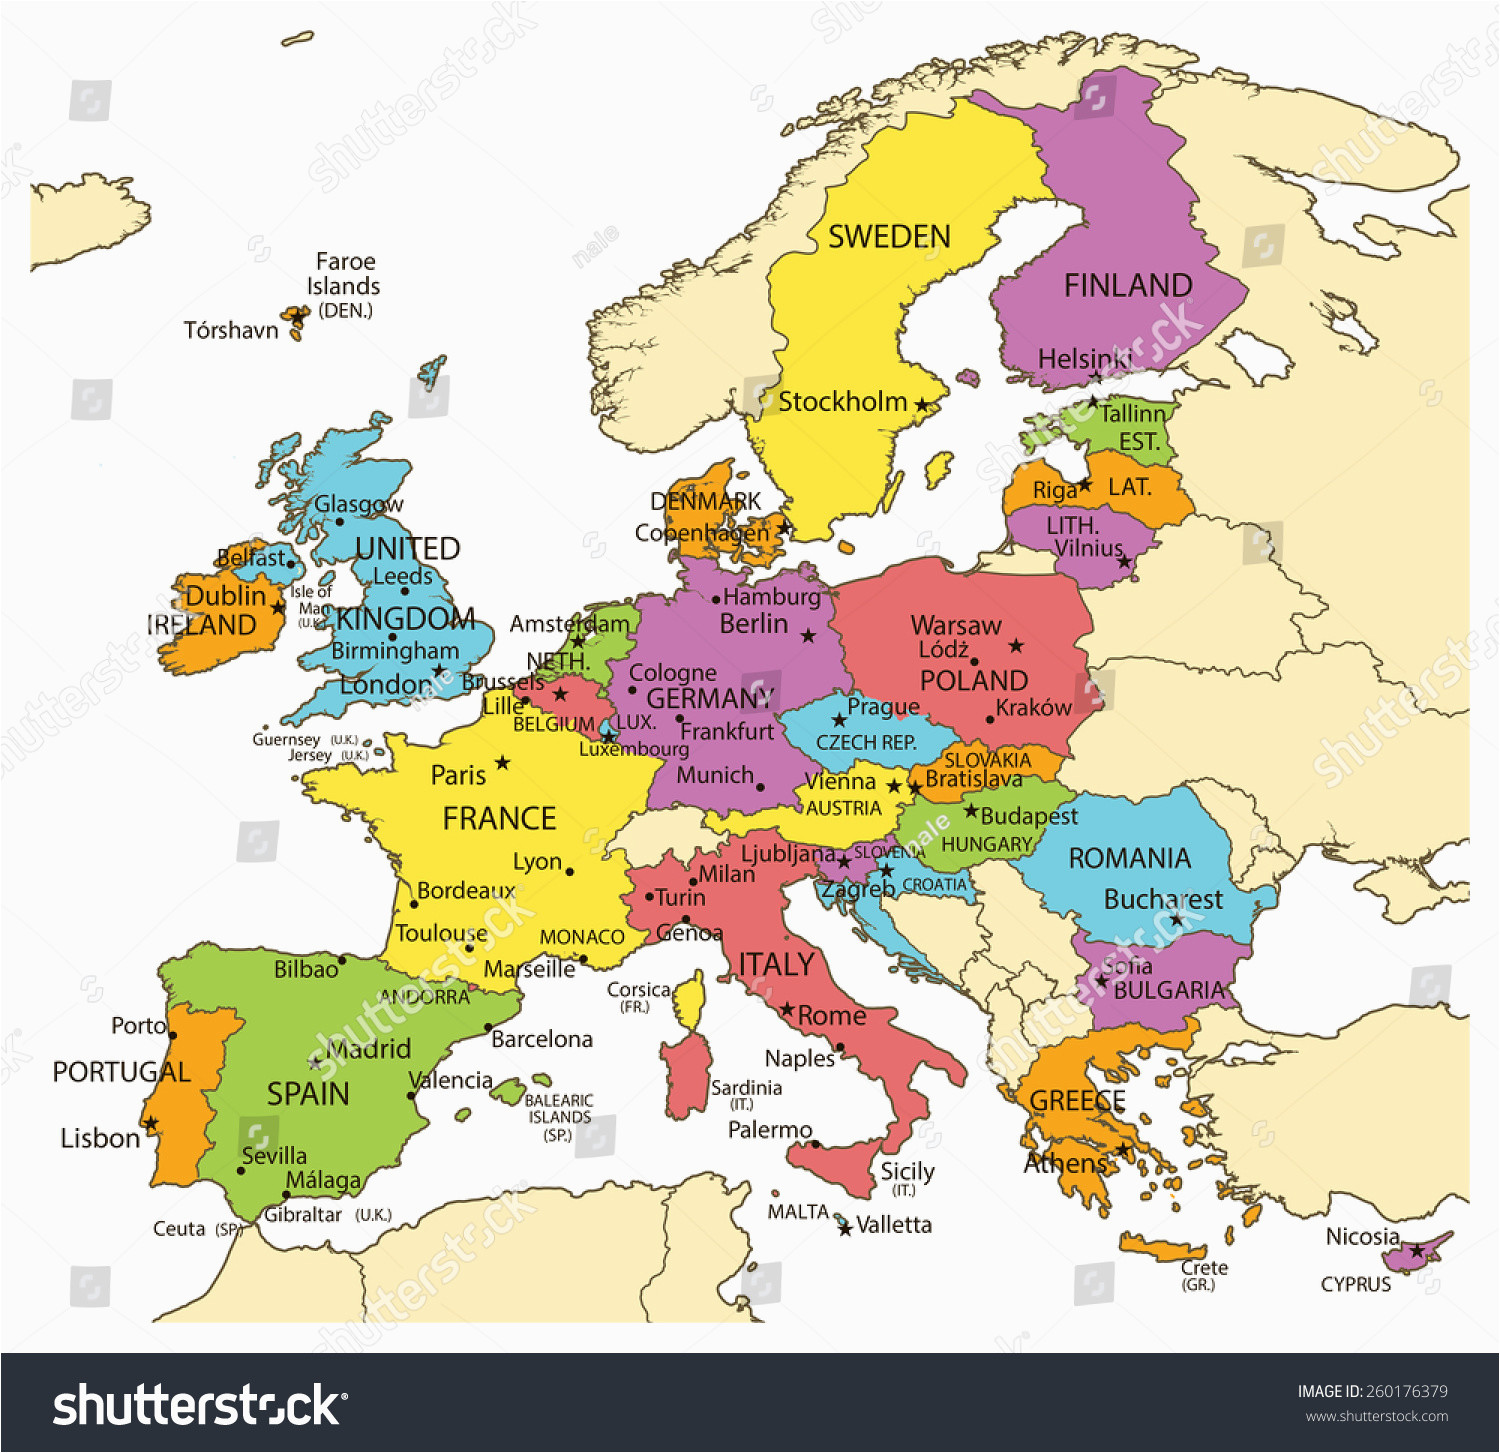 36 abundant map of eu with country names